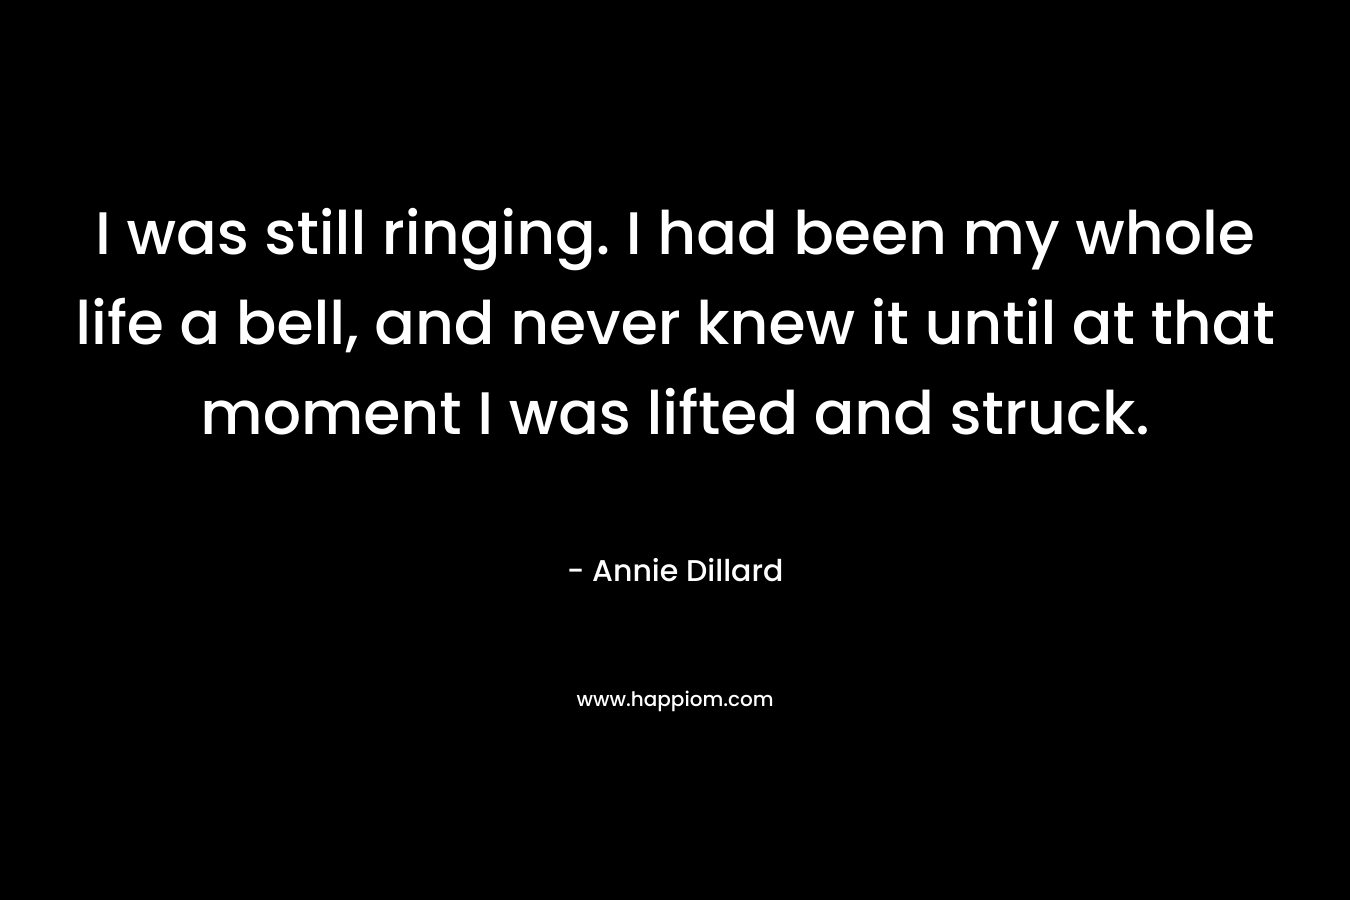 I was still ringing. I had been my whole life a bell, and never knew it until at that moment I was lifted and struck.